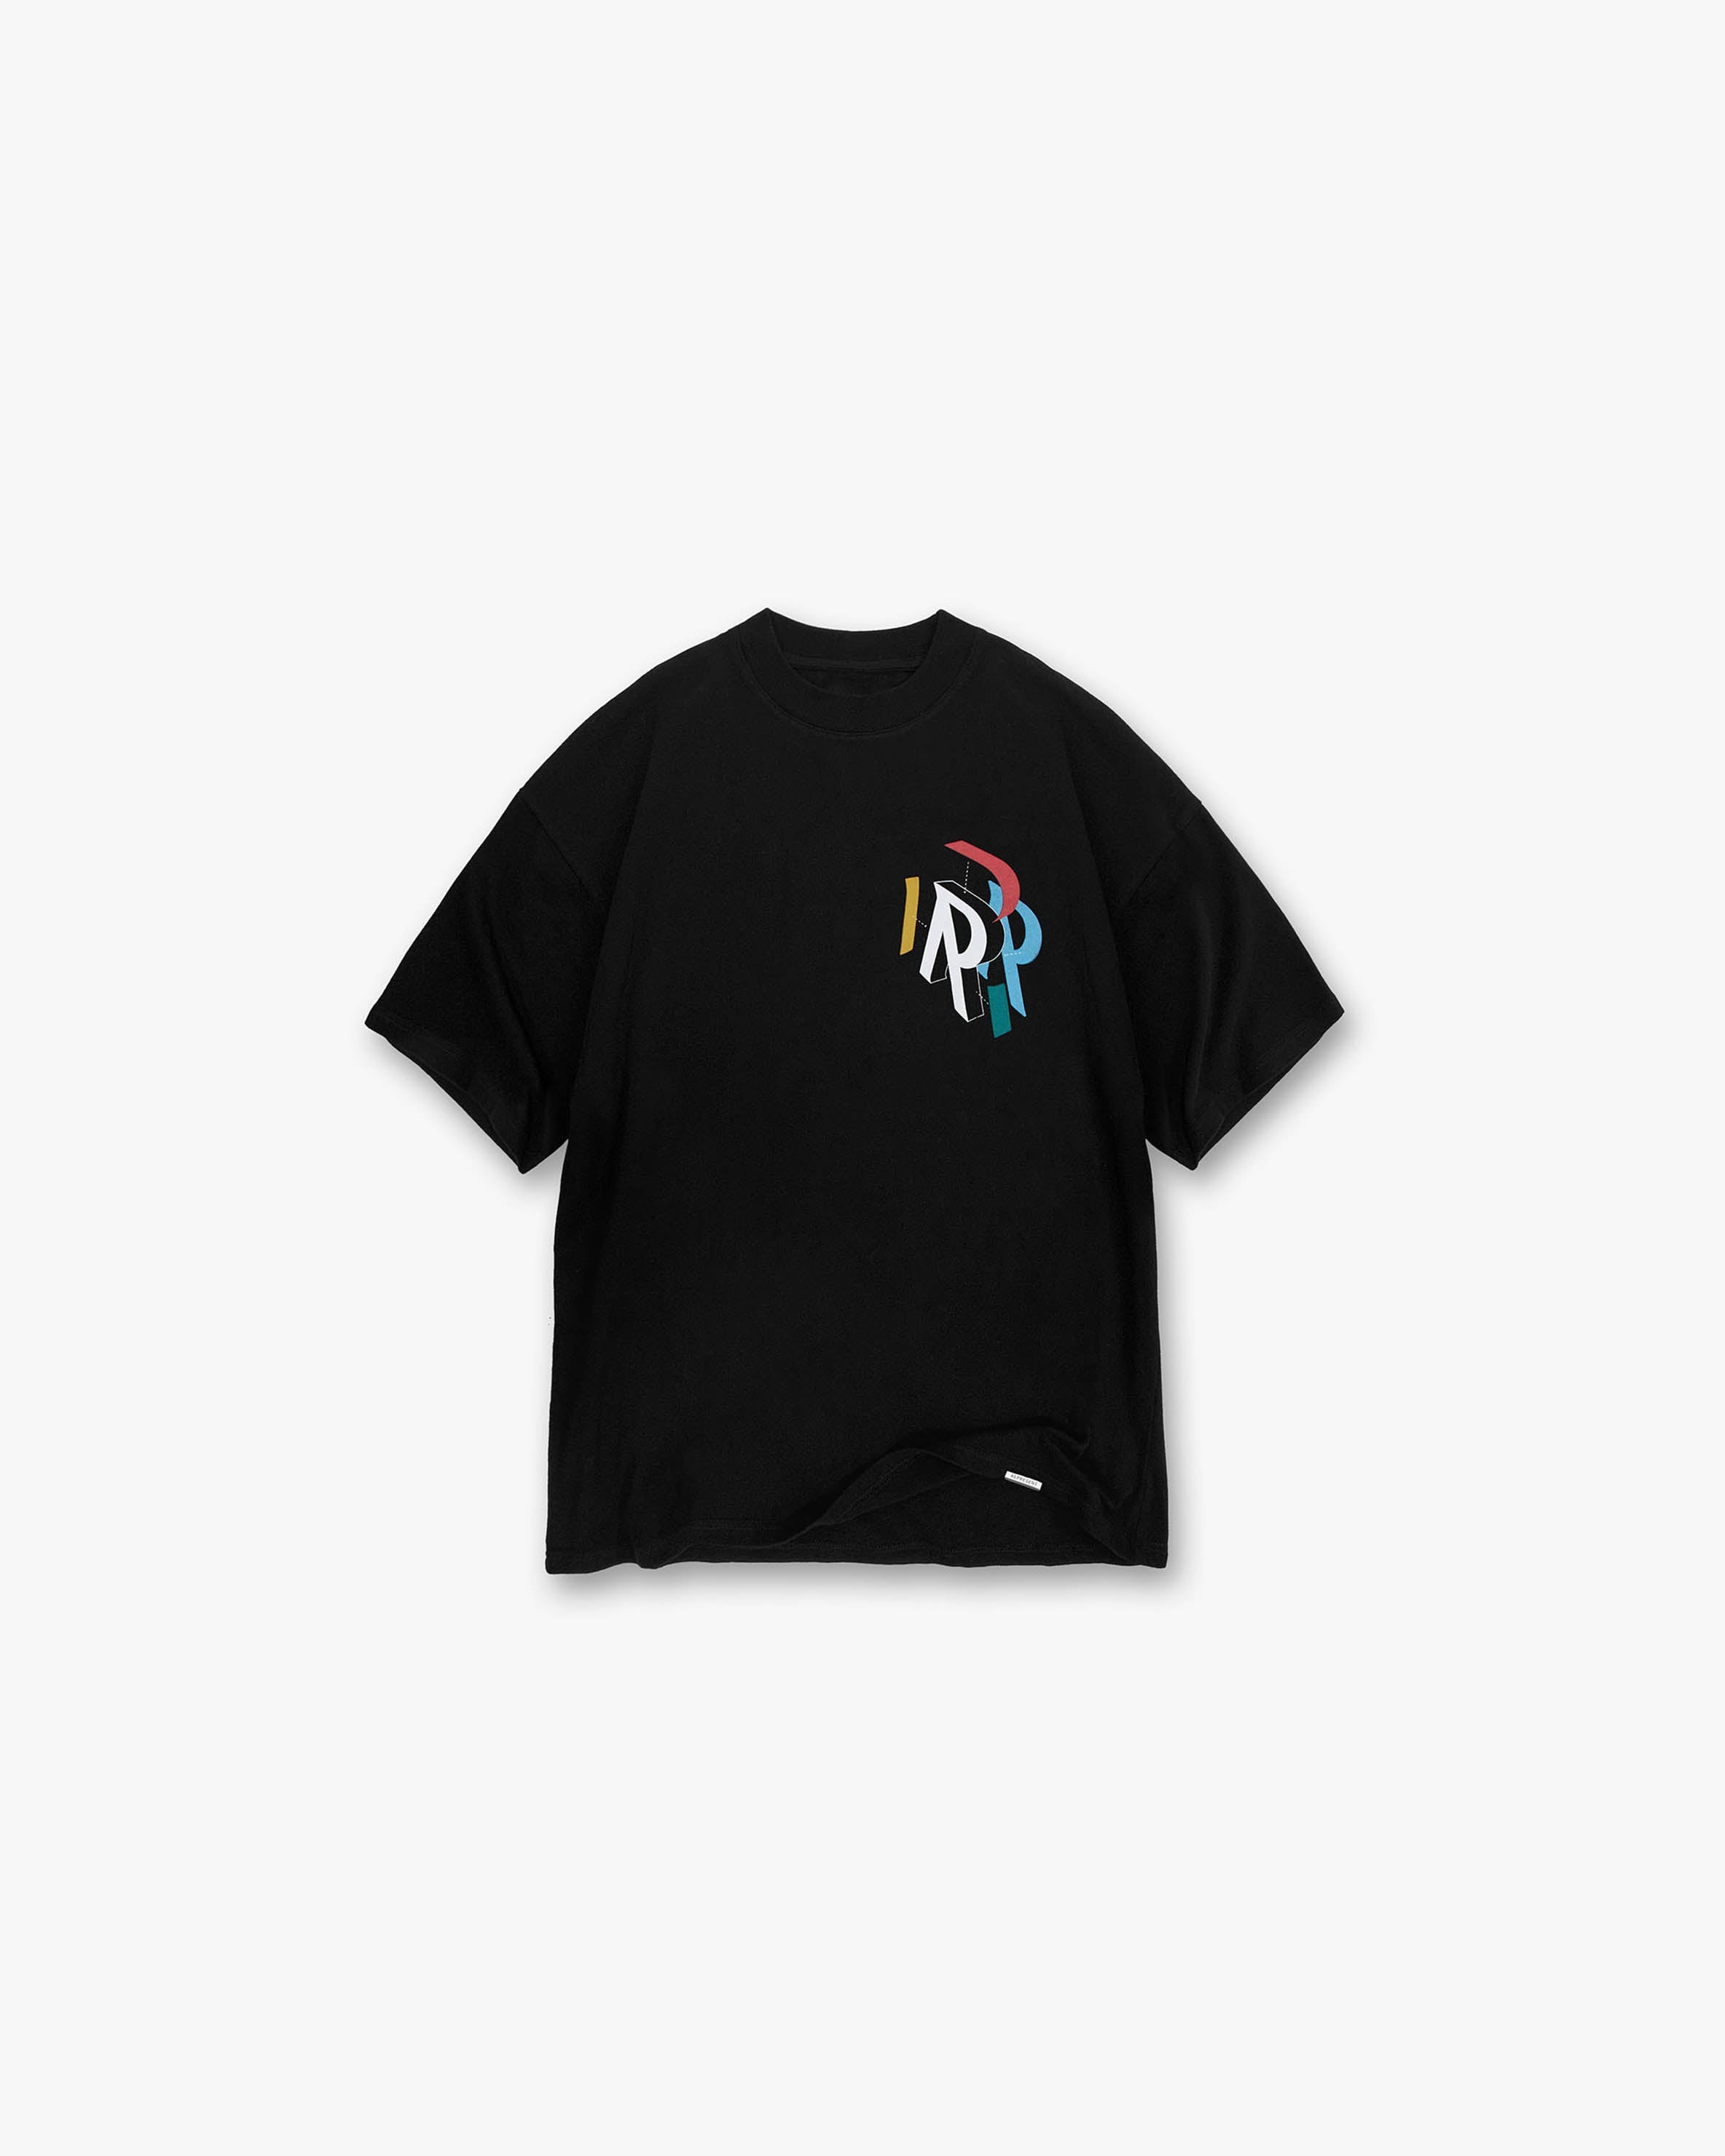 Initial Assembly T-Shirt - Black